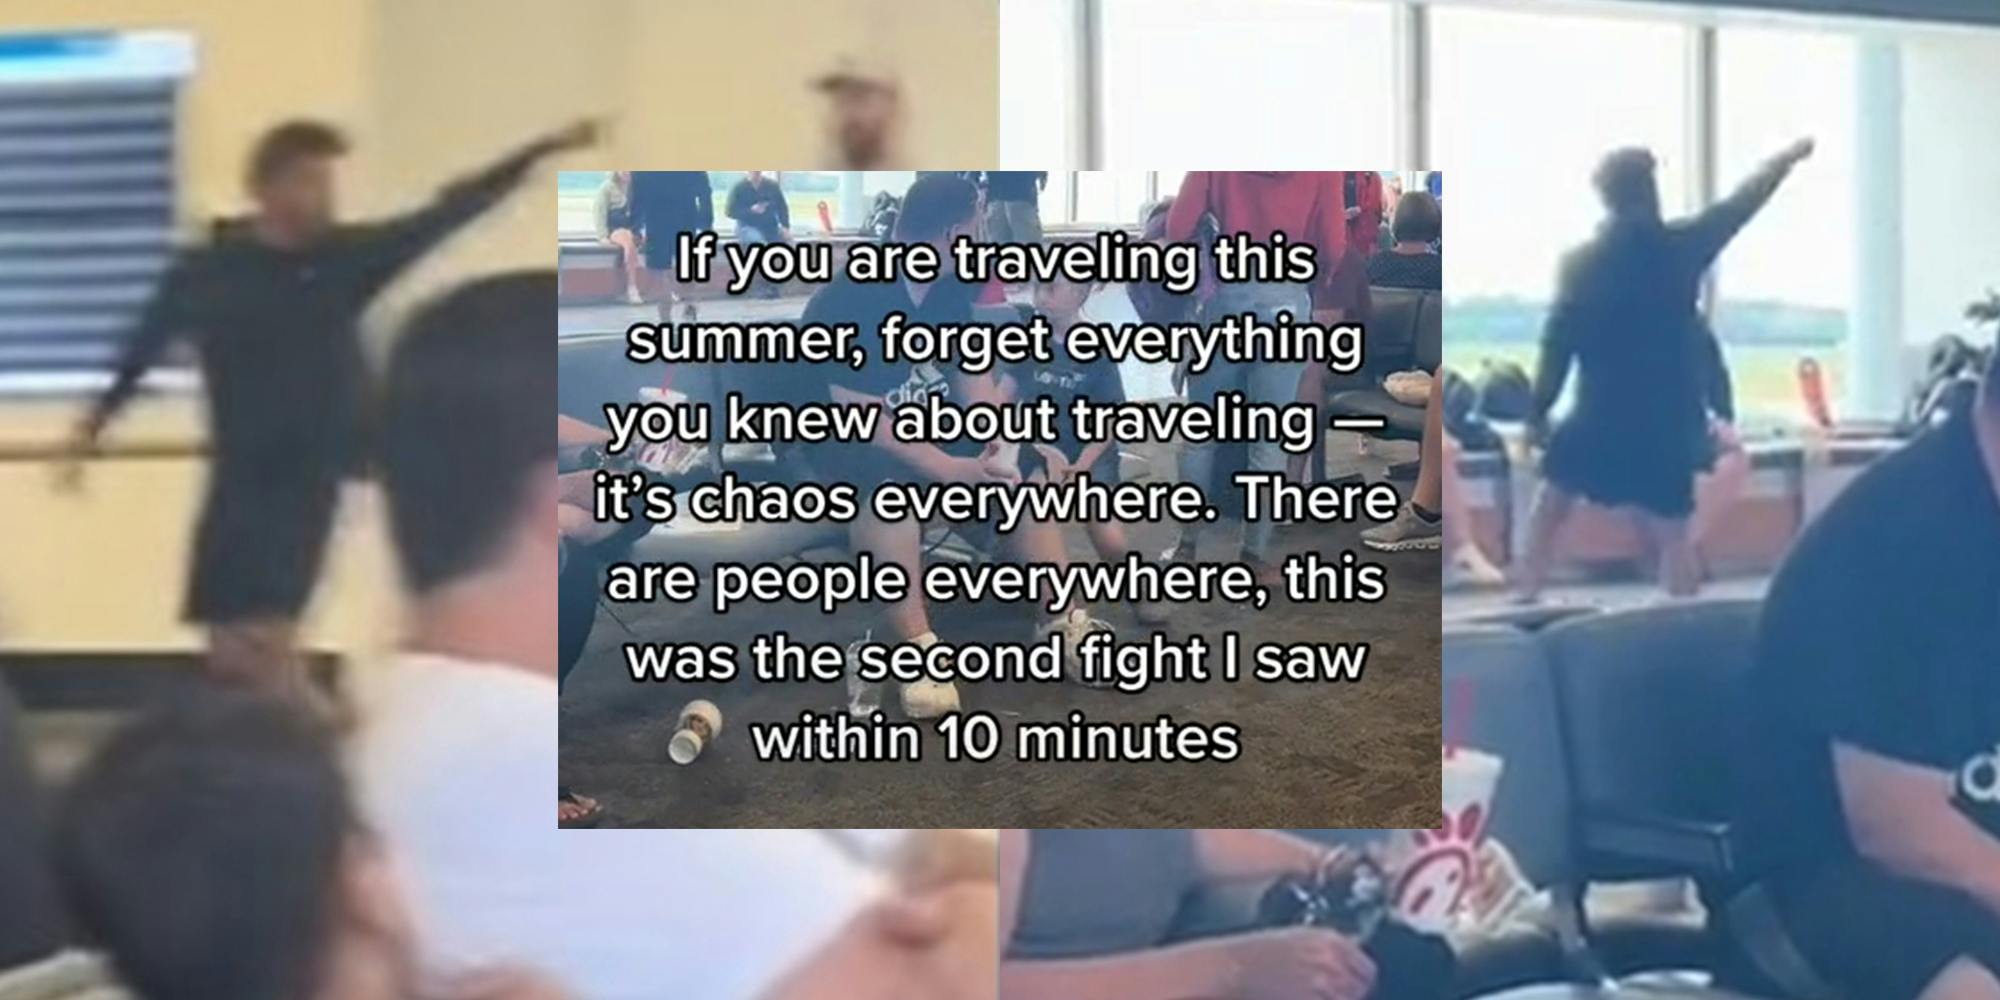 man pointing in airport with inset caption "f you are traveling this summer forget everything you knew about traveling - it's chaos everywhere. There are people everywhere, this was the second fight I saw within 10 minutes"